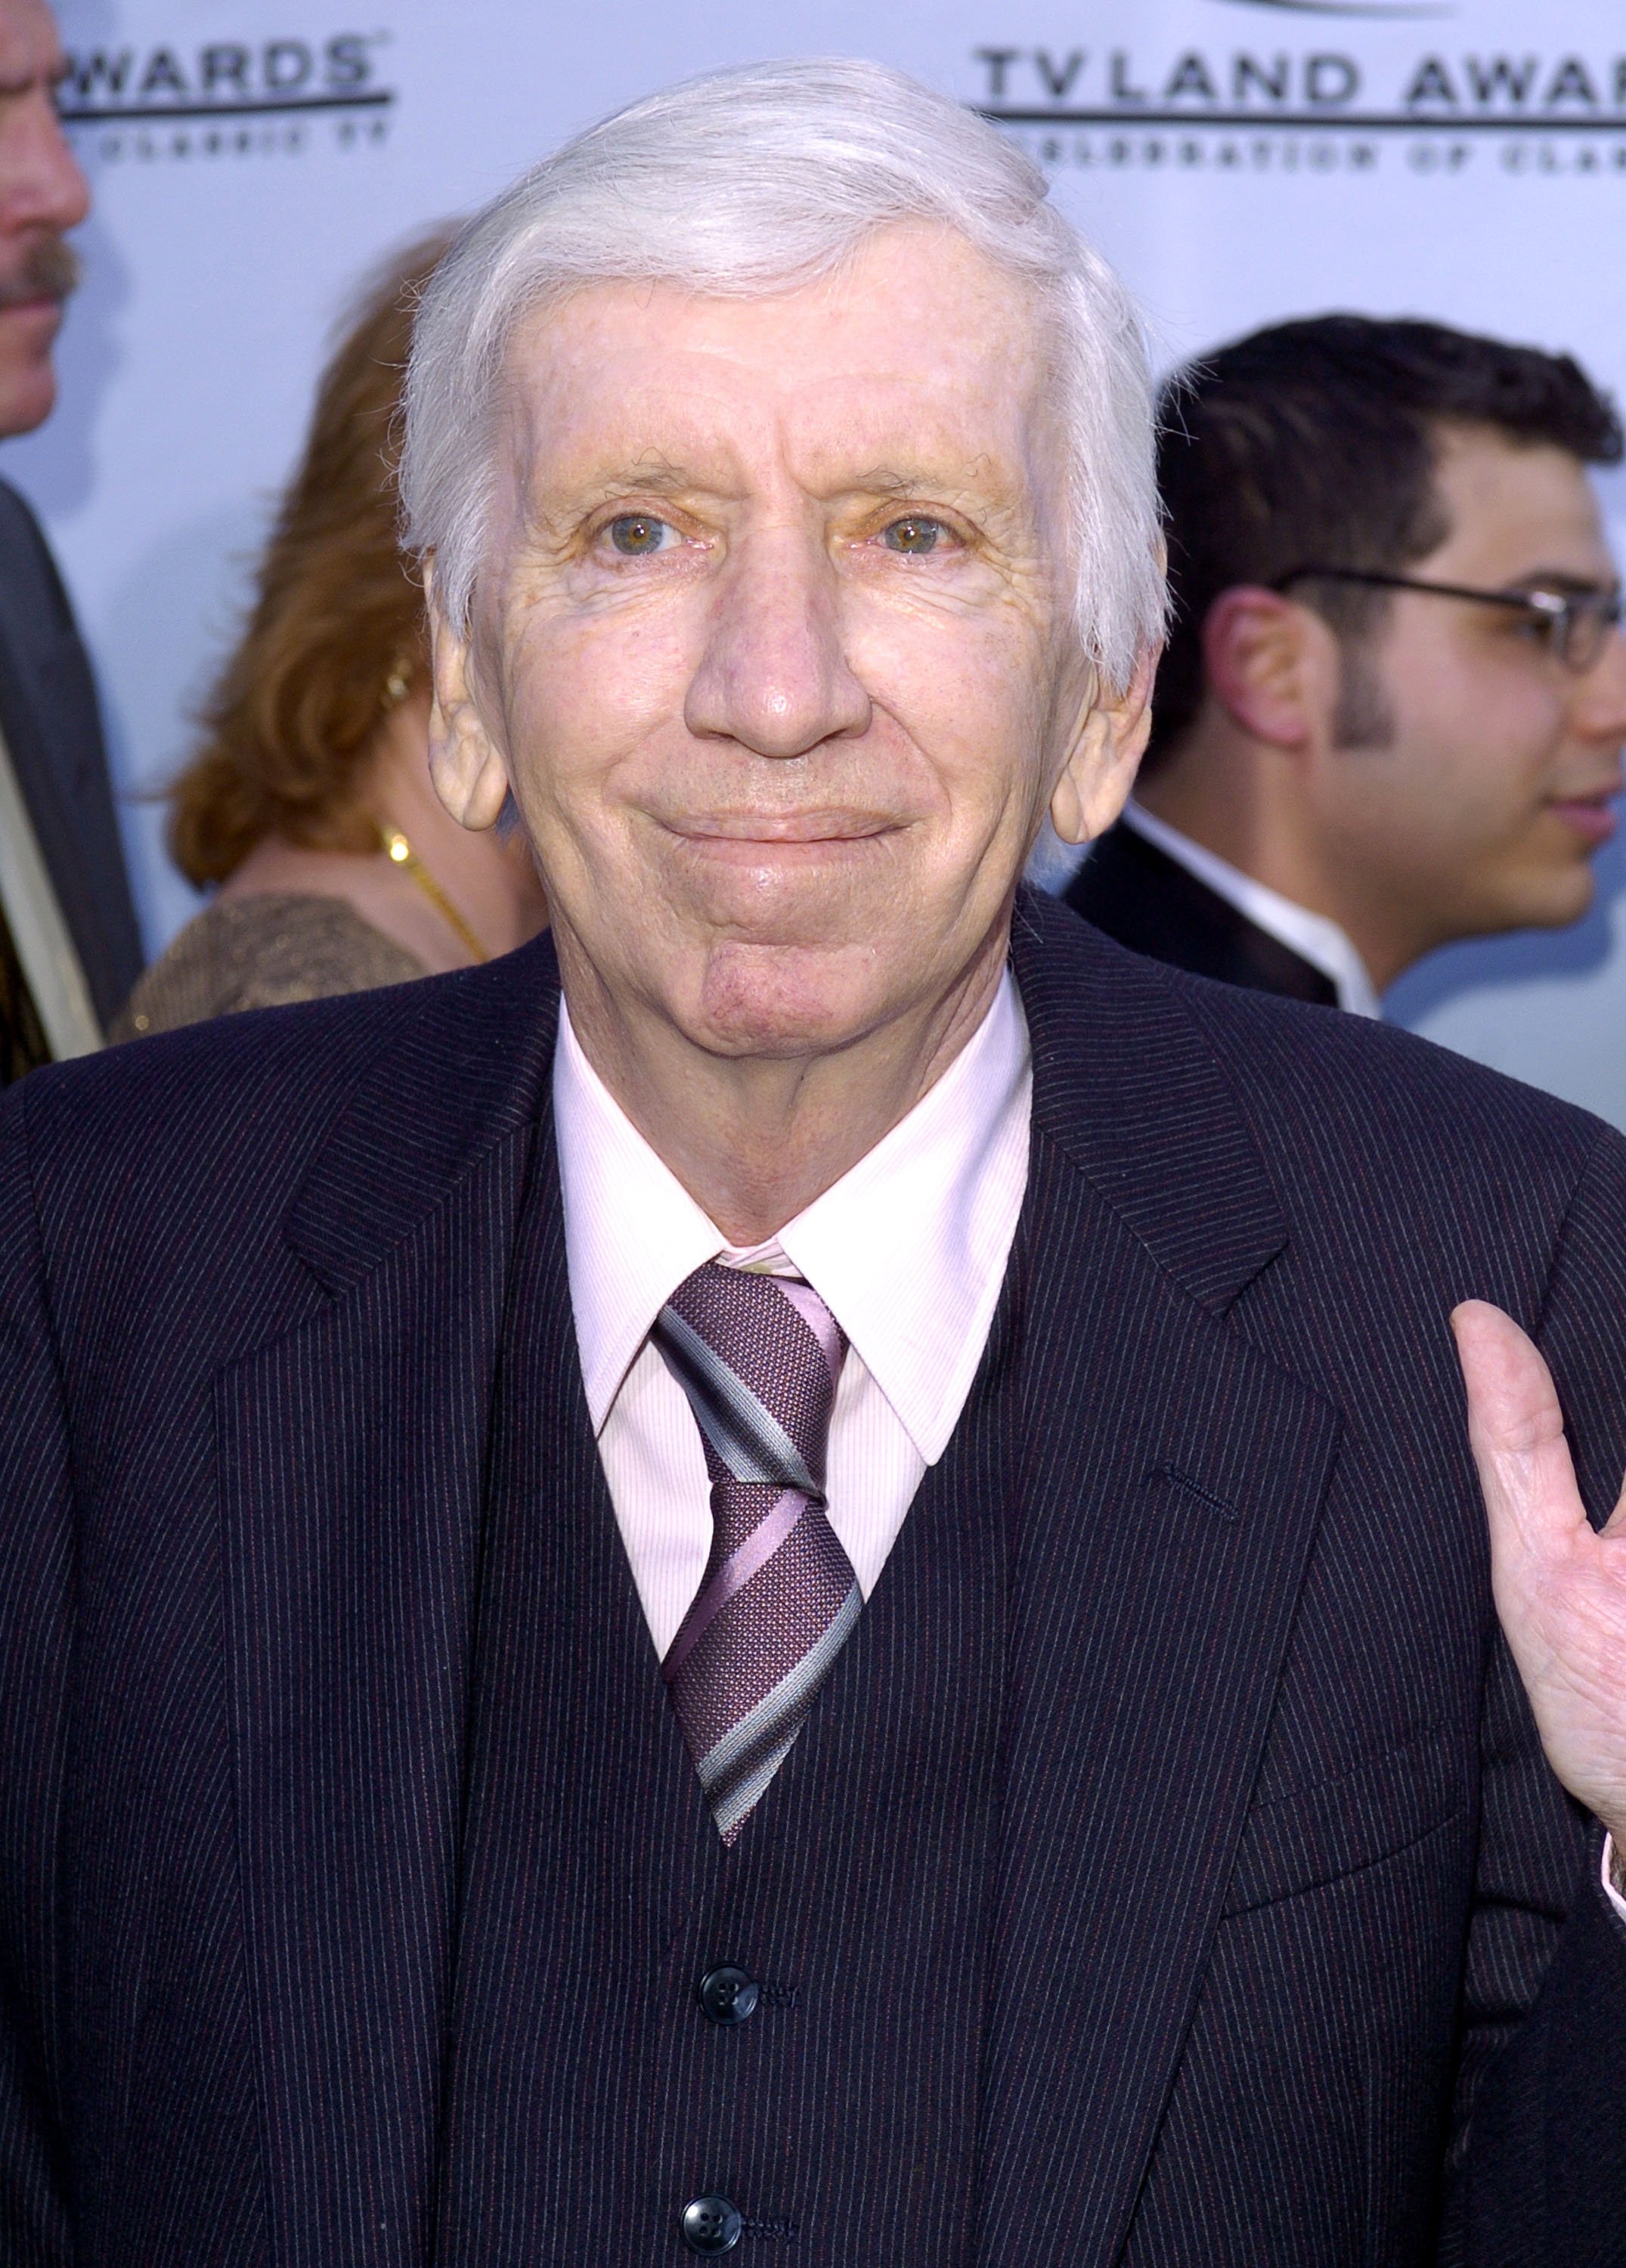 Bob Denver attend the 2nd Annual TV Land Awards on March 7, 2004, at The Hollywood Palladium in Hollywood, California. | Source: Getty Images